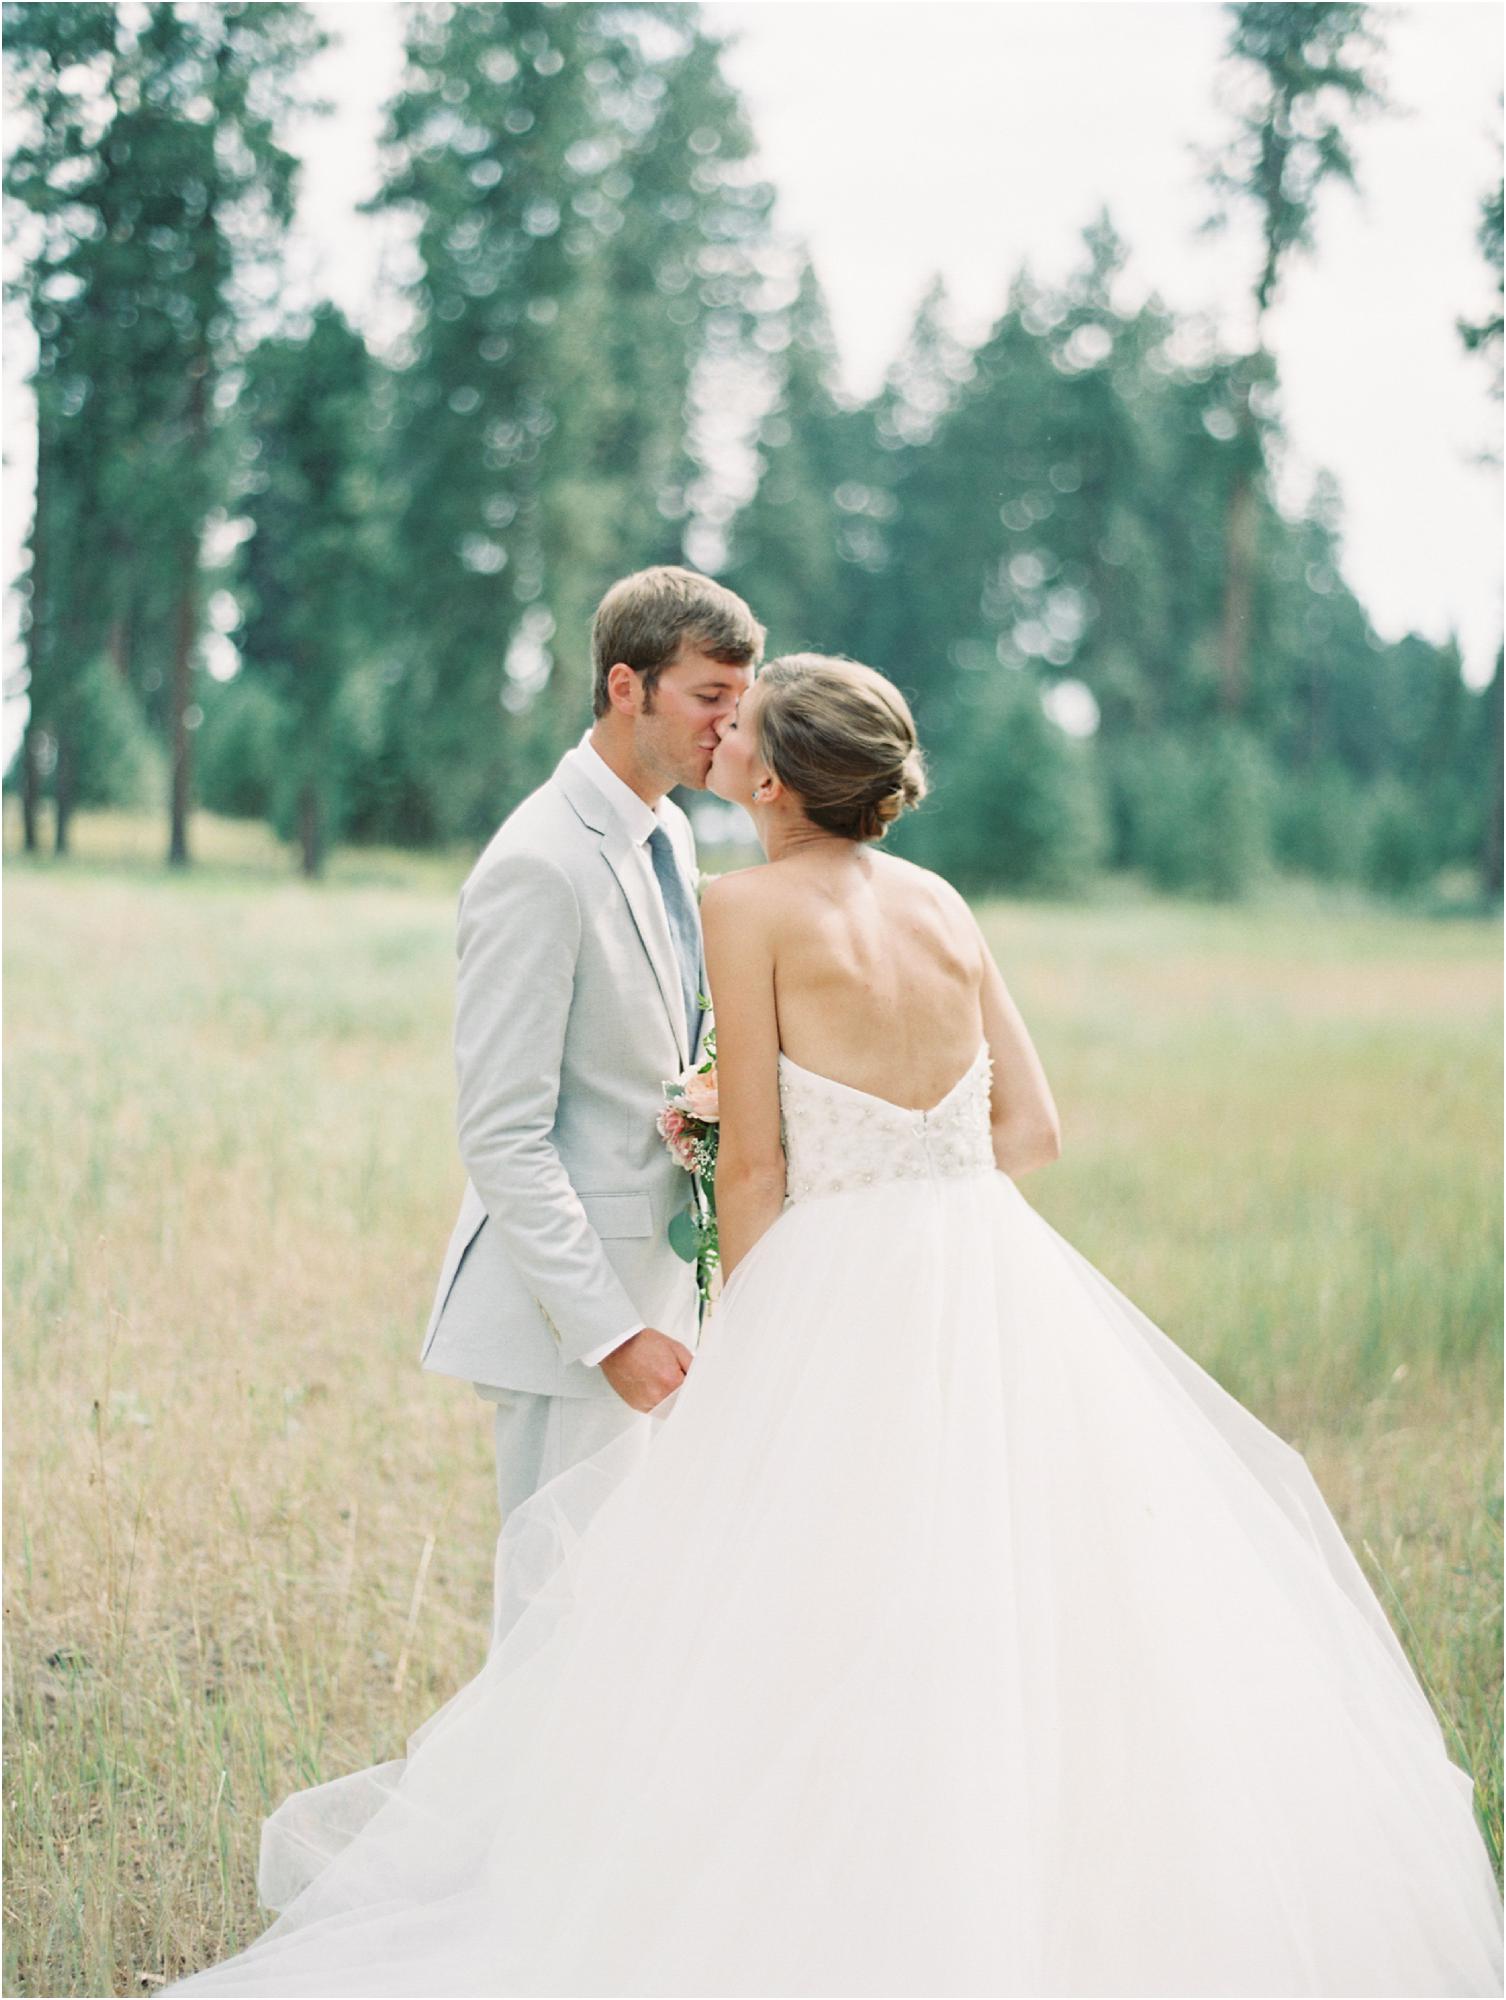  Montana Wedding at Glacier Mountain Lodge

Design and Florals: Goldfinch Events http://www.goldfinchevents.com

�Jeremiah & Rachel Photography 